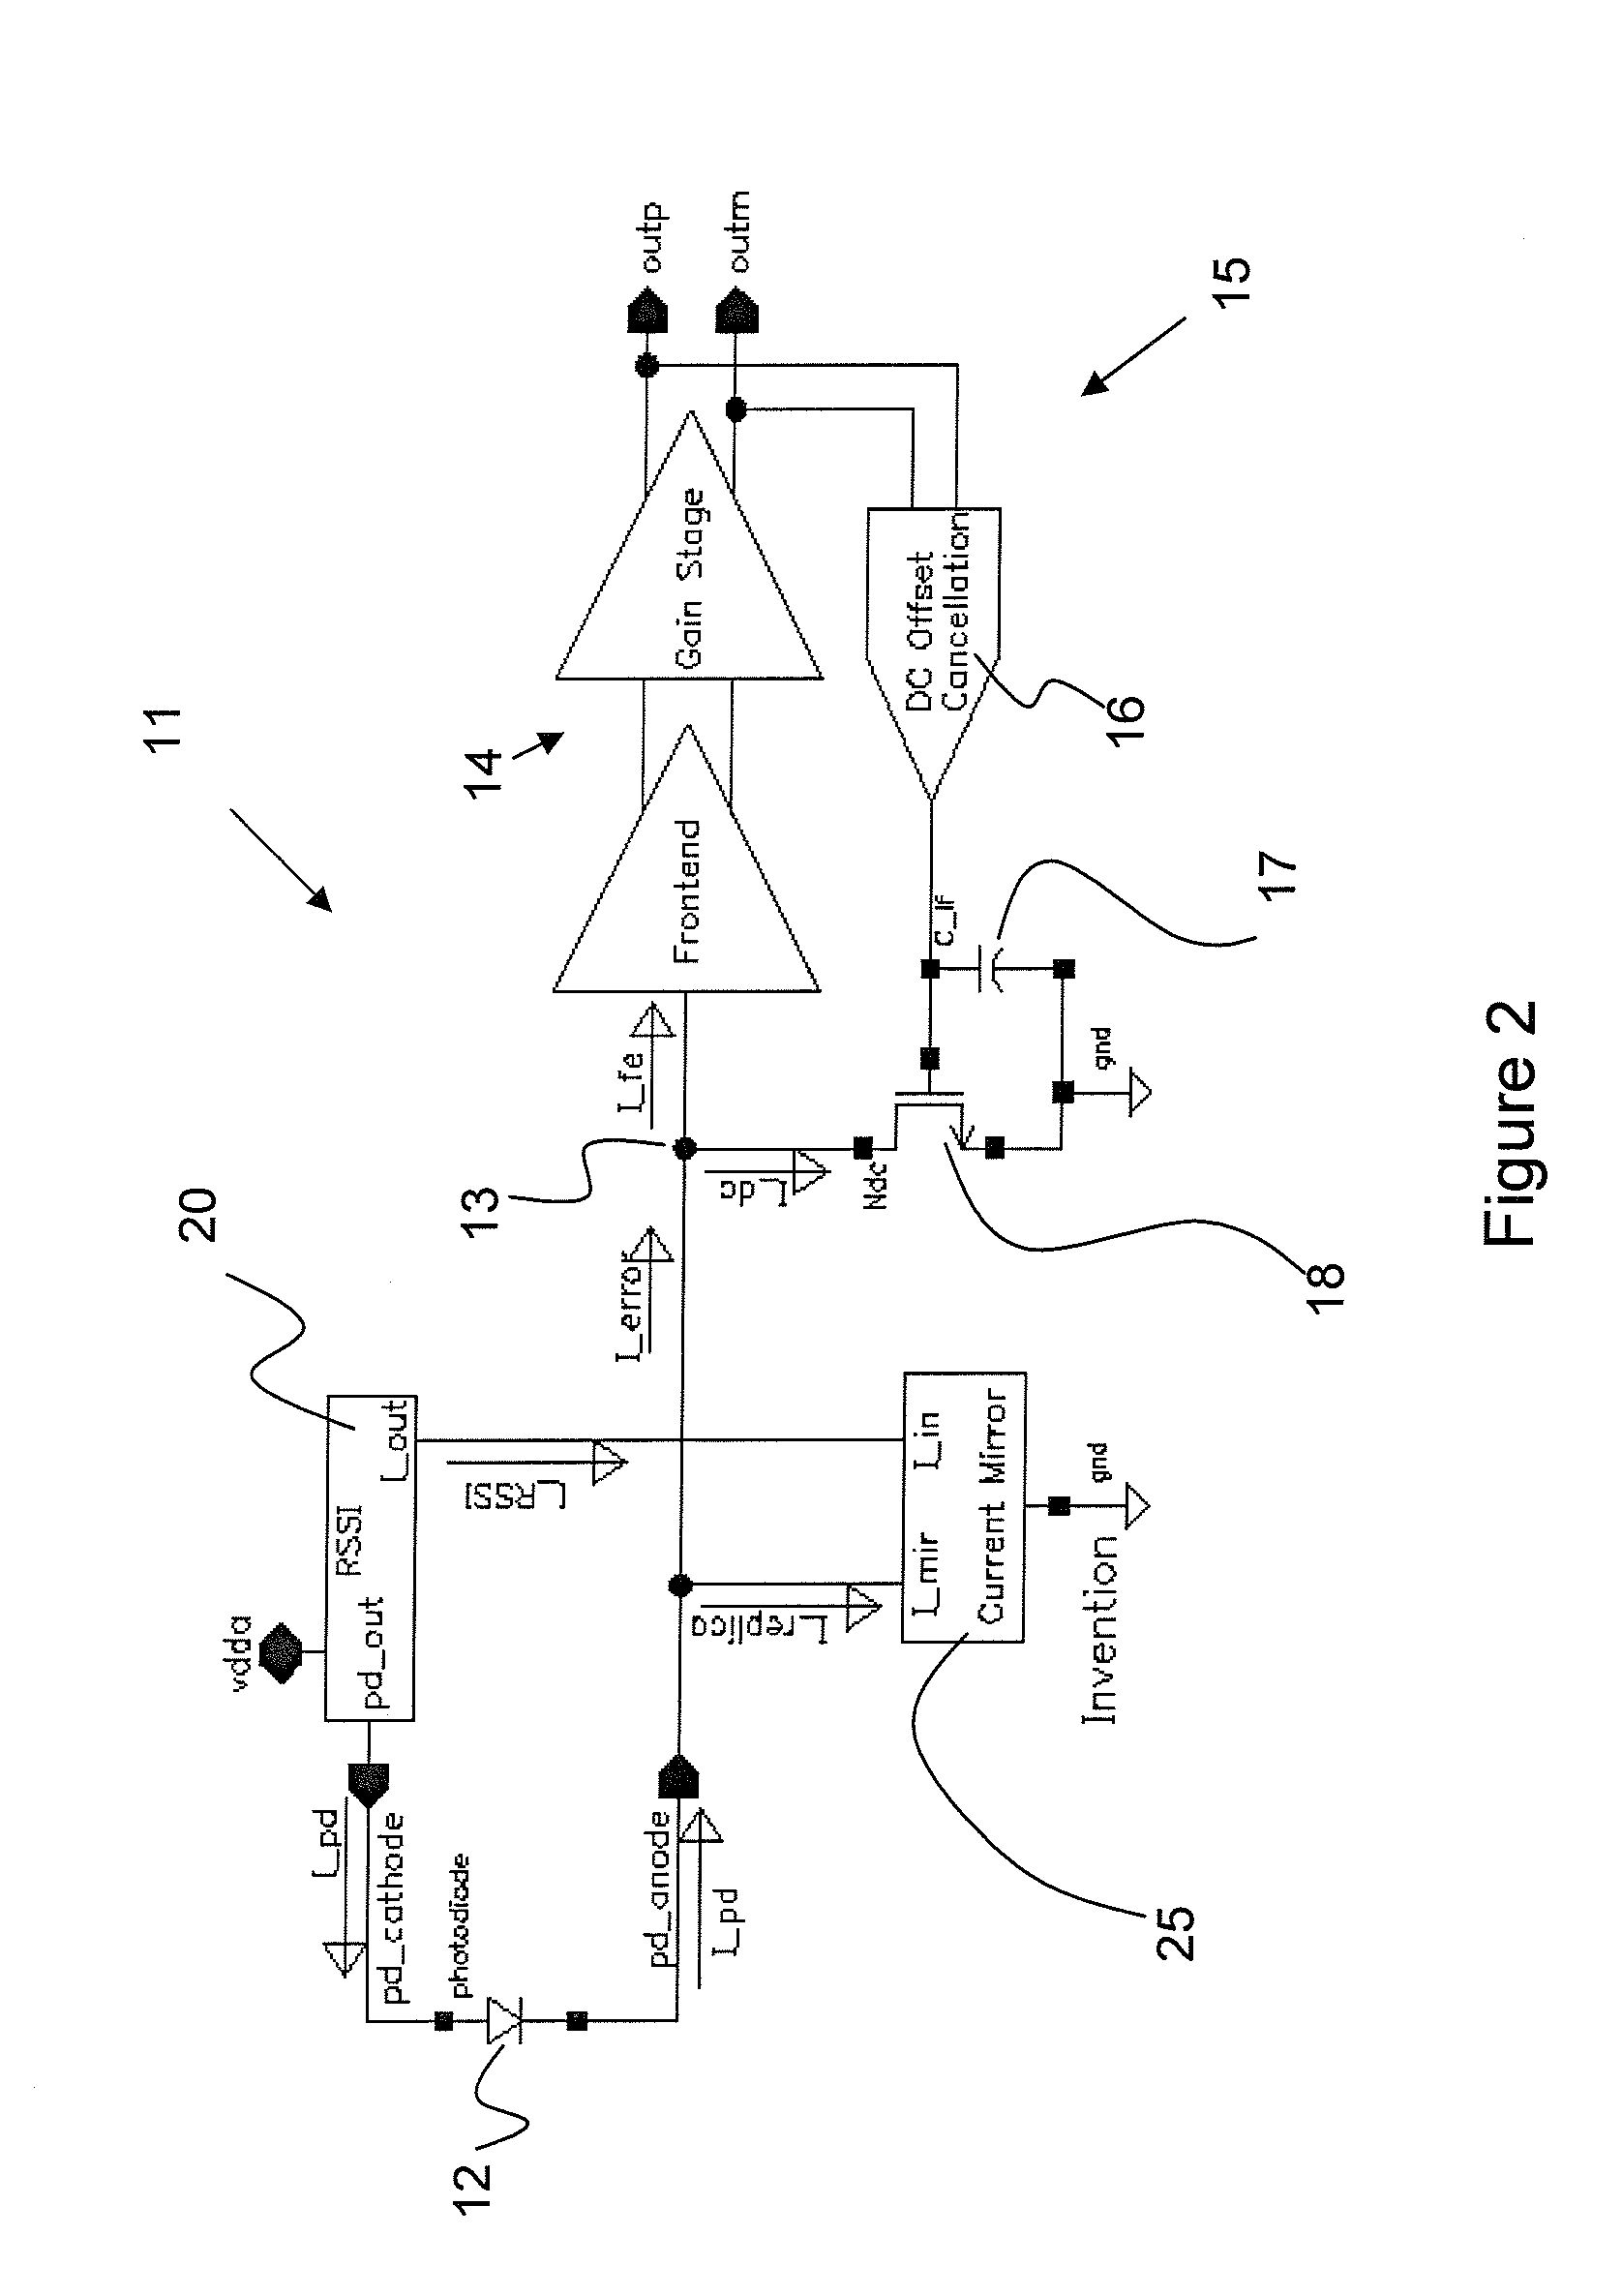 DC Offset Cancellation For A Trans-Impedance Amplifier